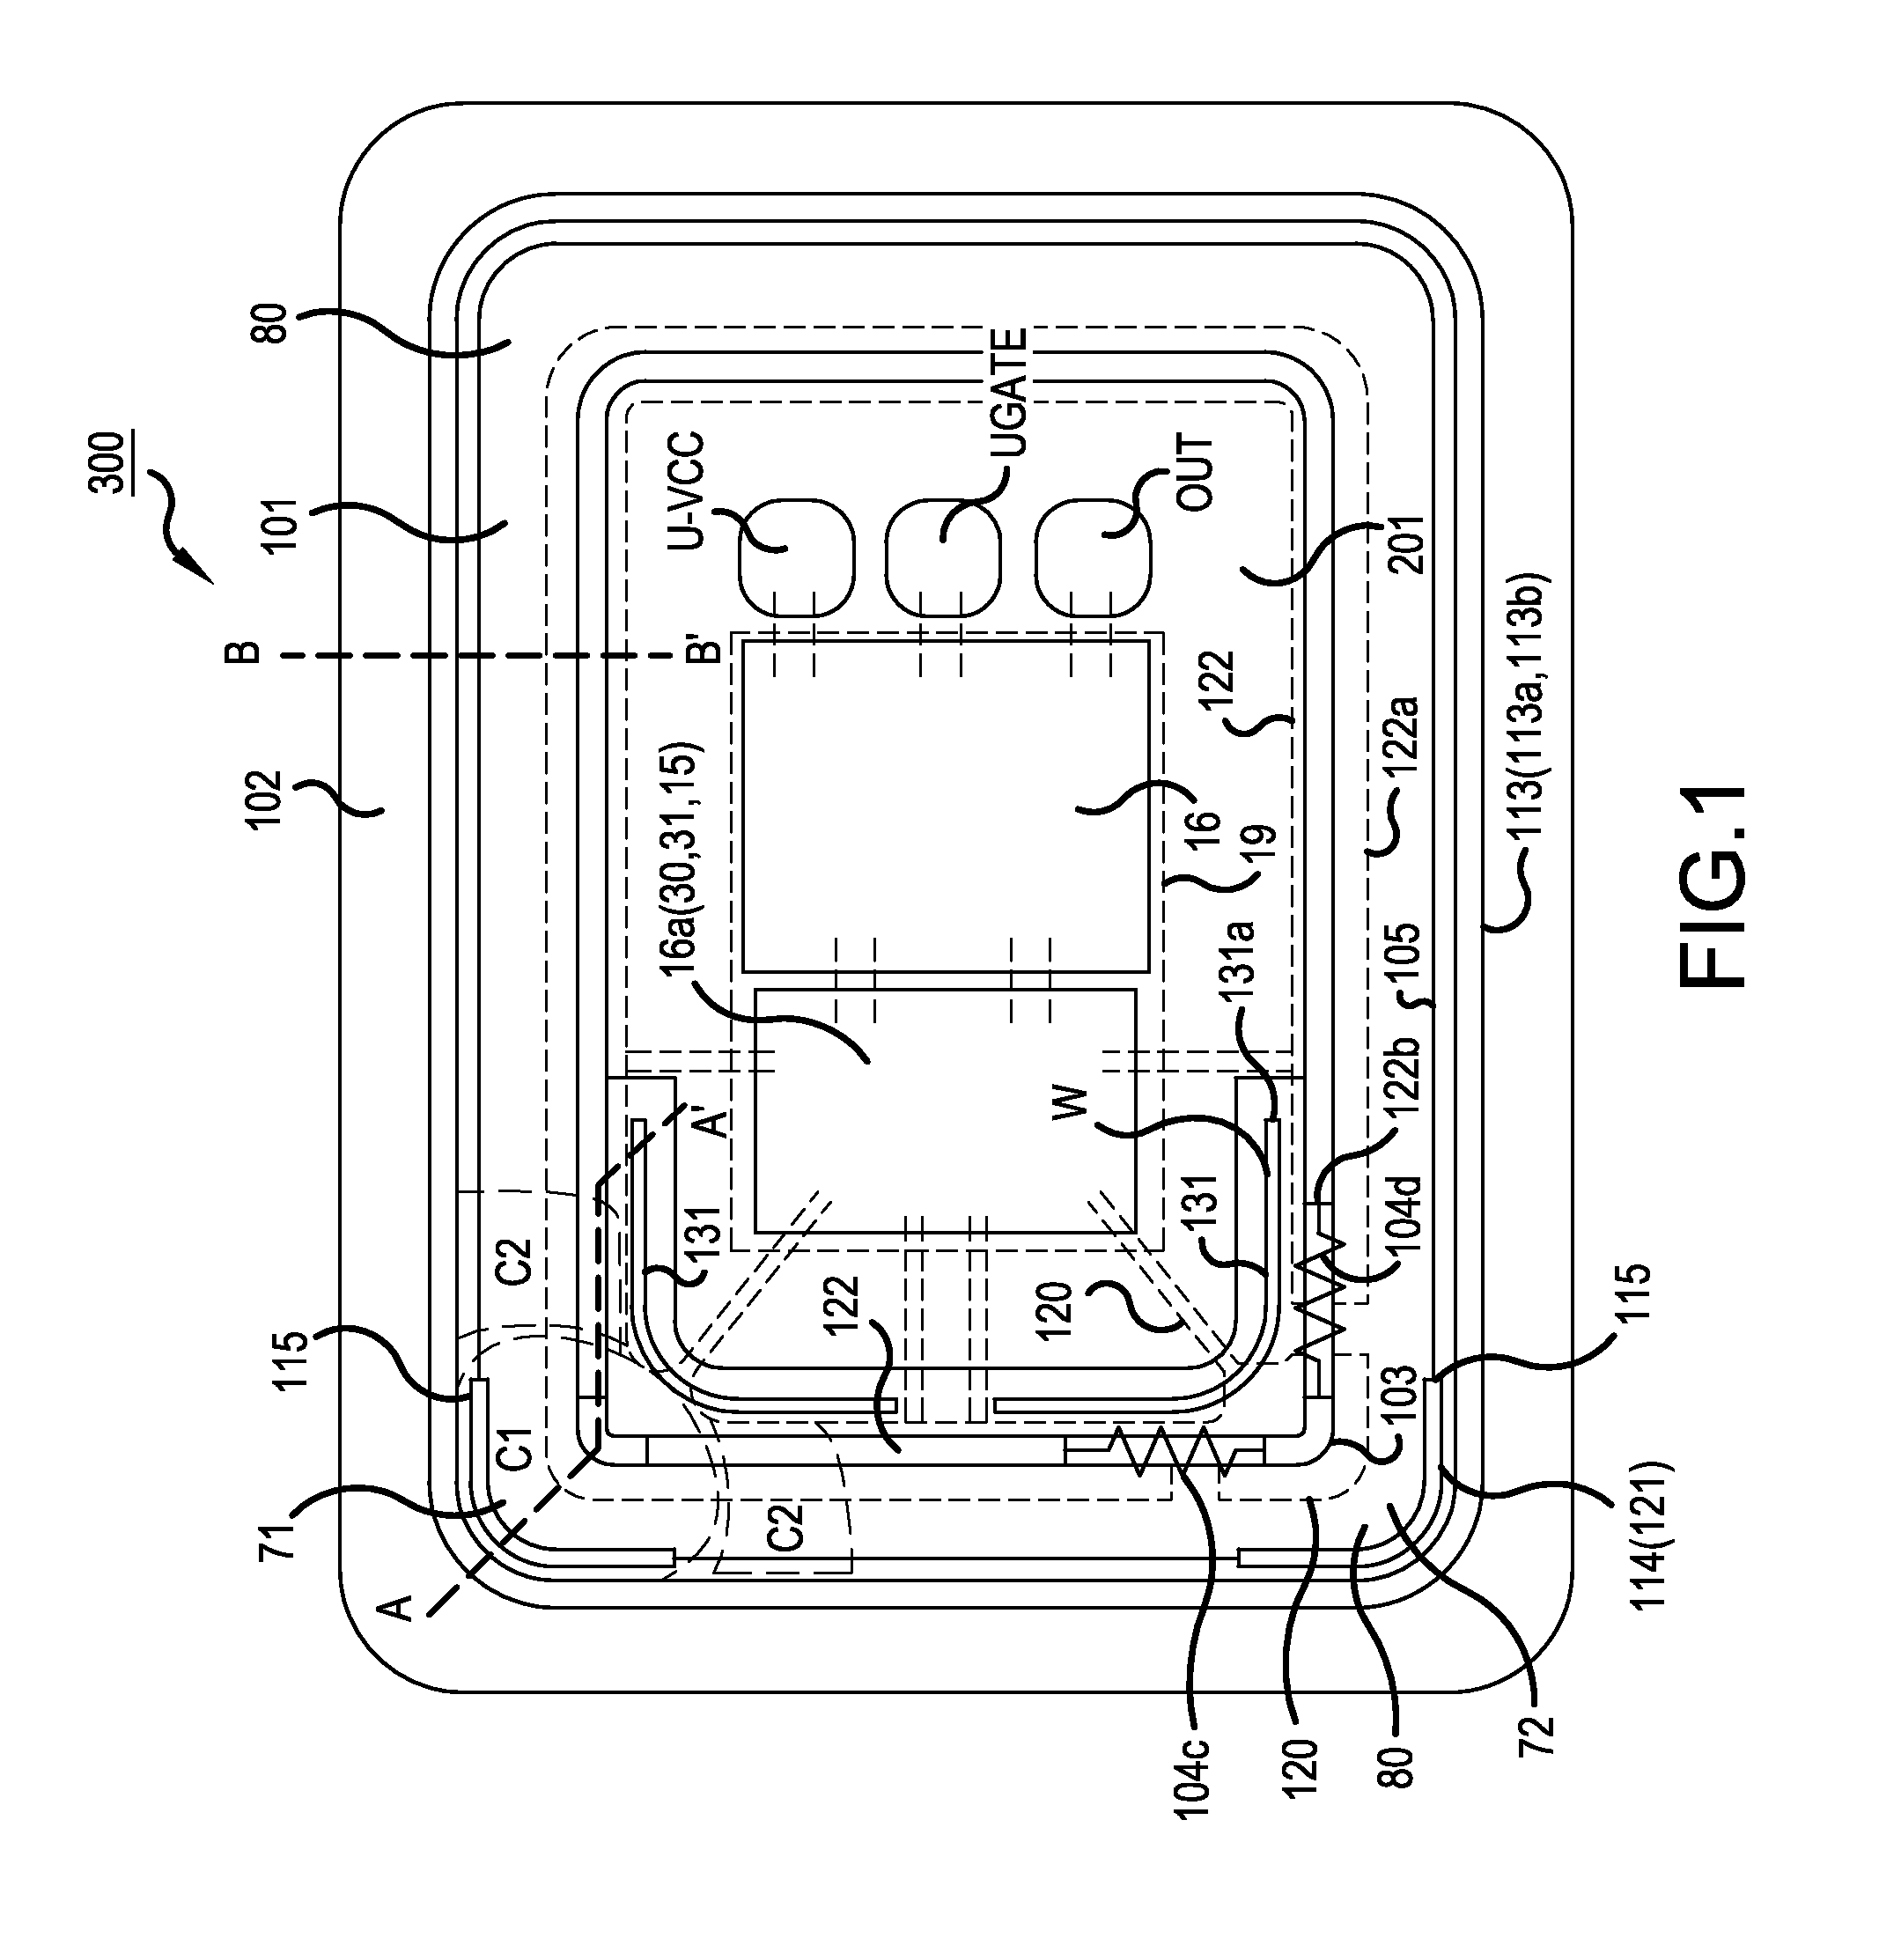 High voltage semiconductor device